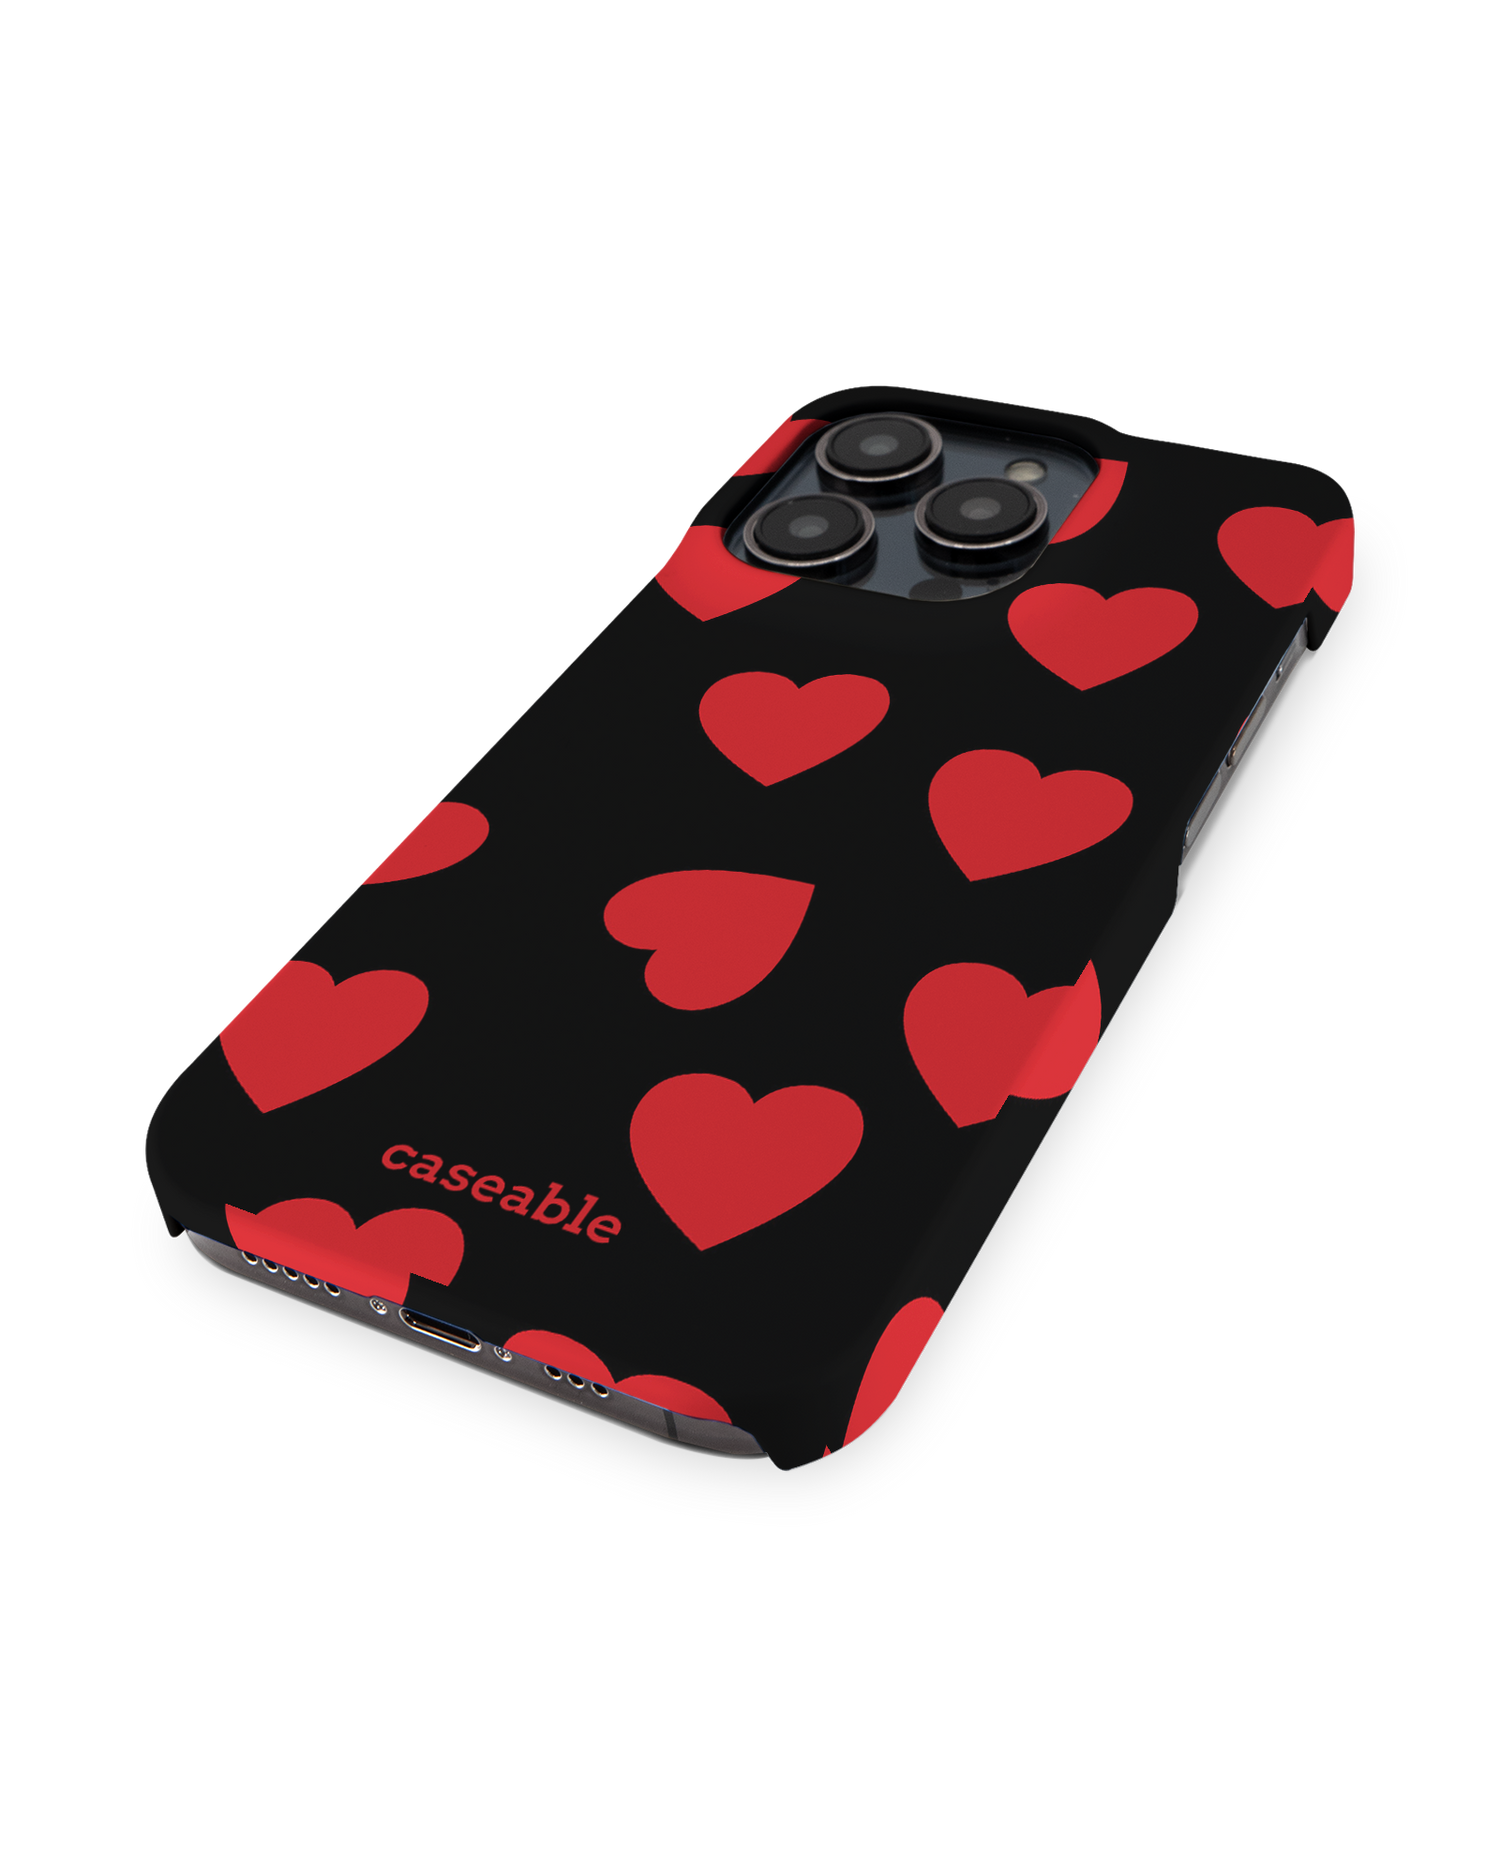 Repeating Hearts Hard Shell Phone Case for Apple iPhone 14 Pro: Perspective view